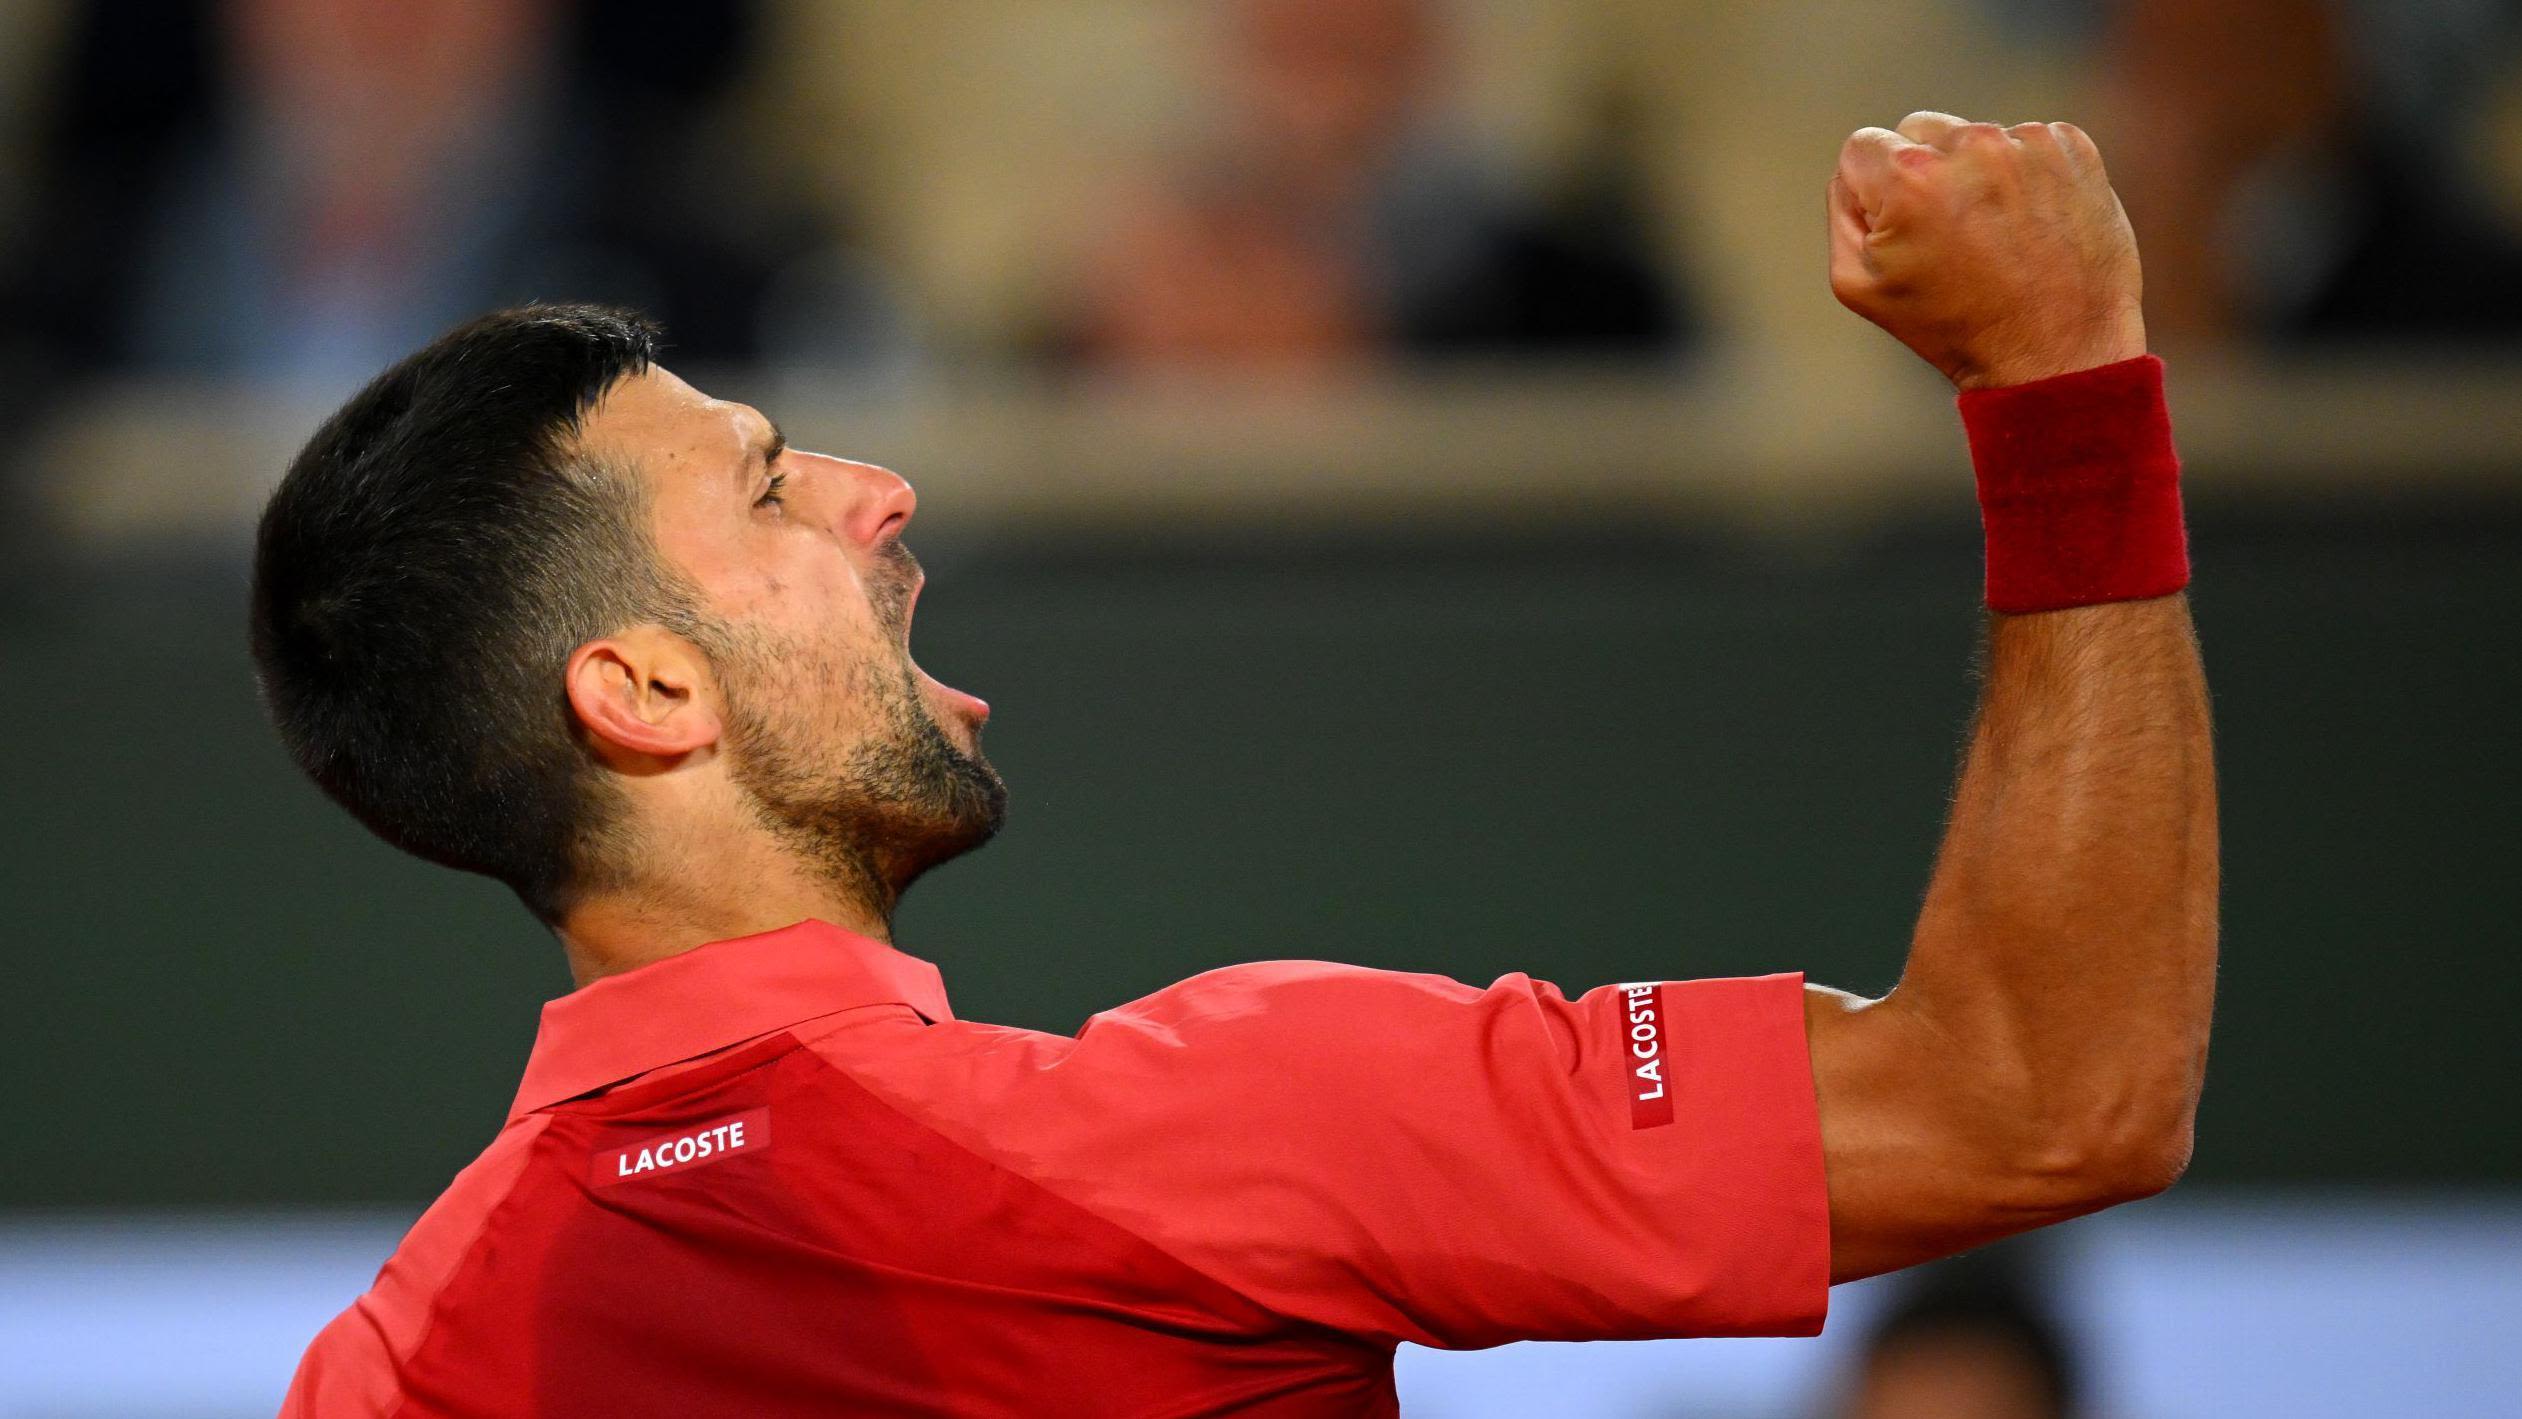 Djokovic 'moving in positive direction' with French Open win